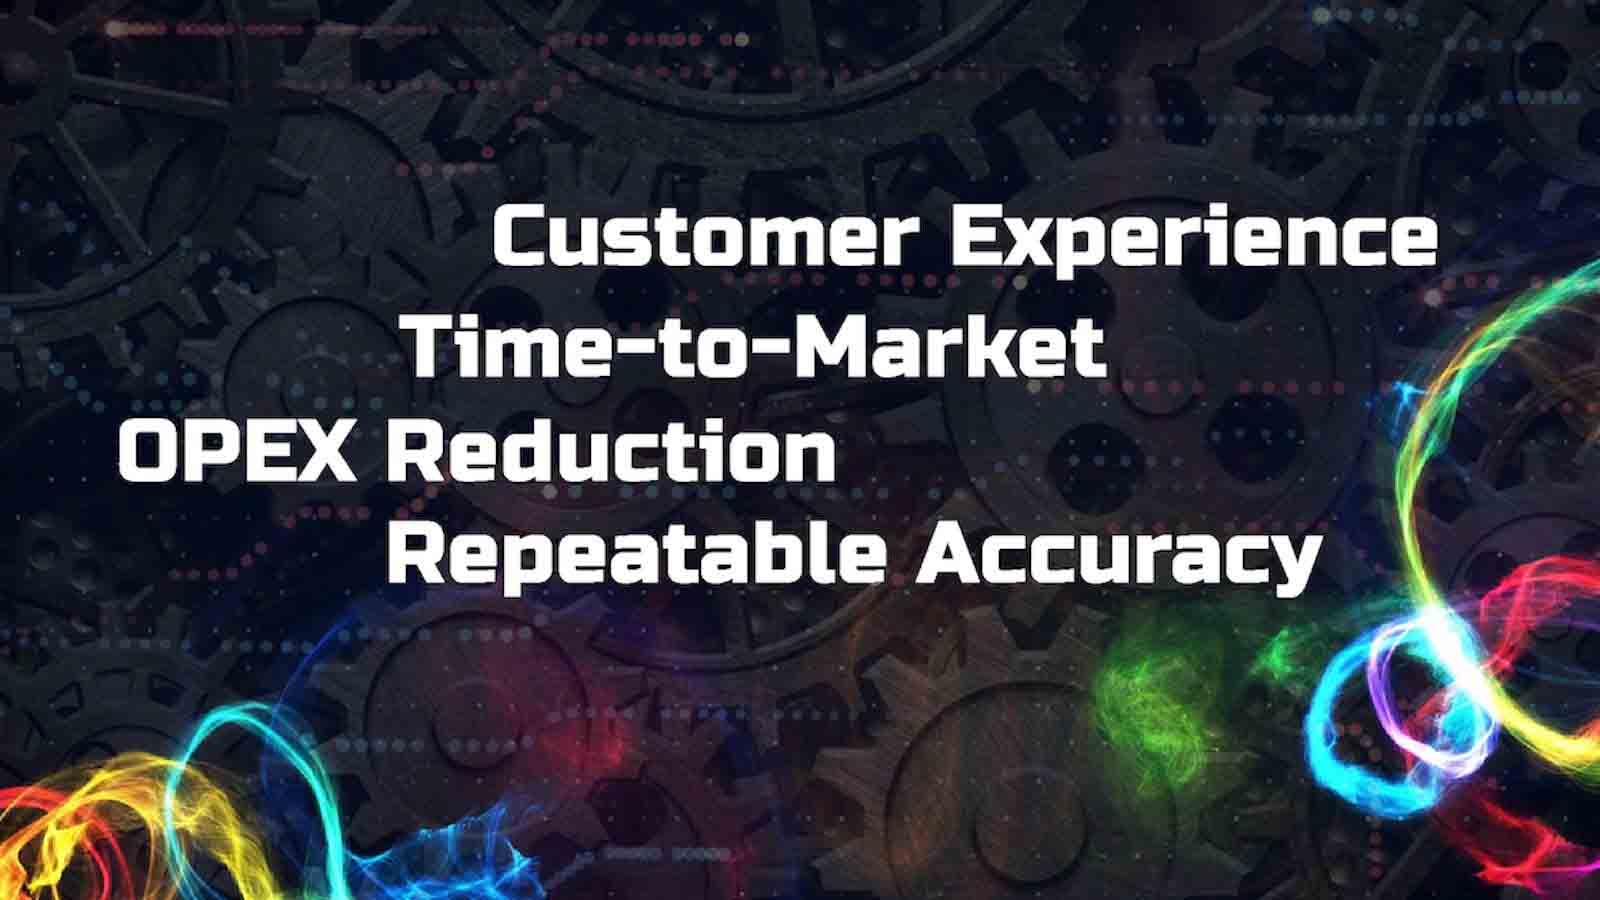 customer experience time-to-market OPEX reduction repeatable accuracy